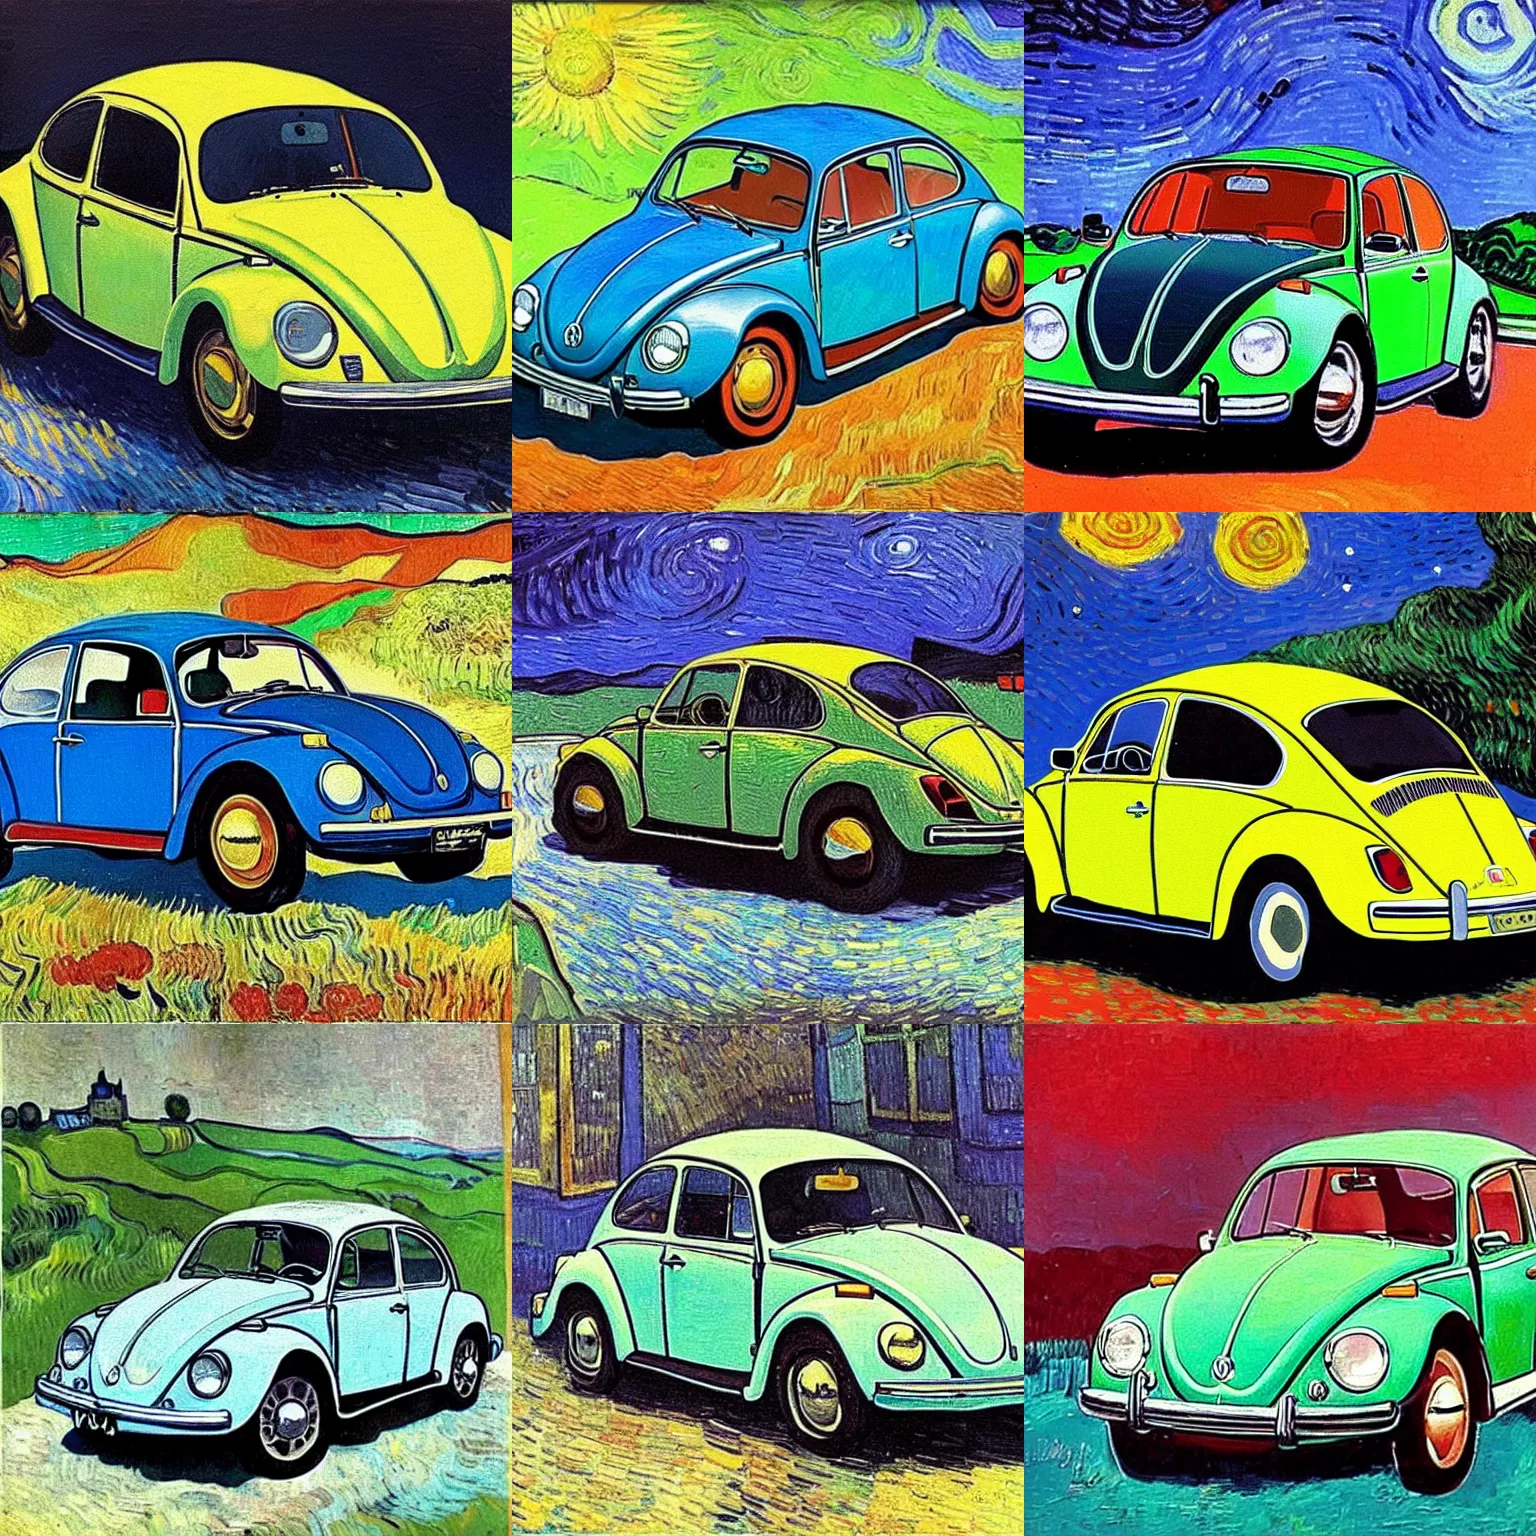 Prompt: painting of a 1970 vw beetle painted by vincent van gogh